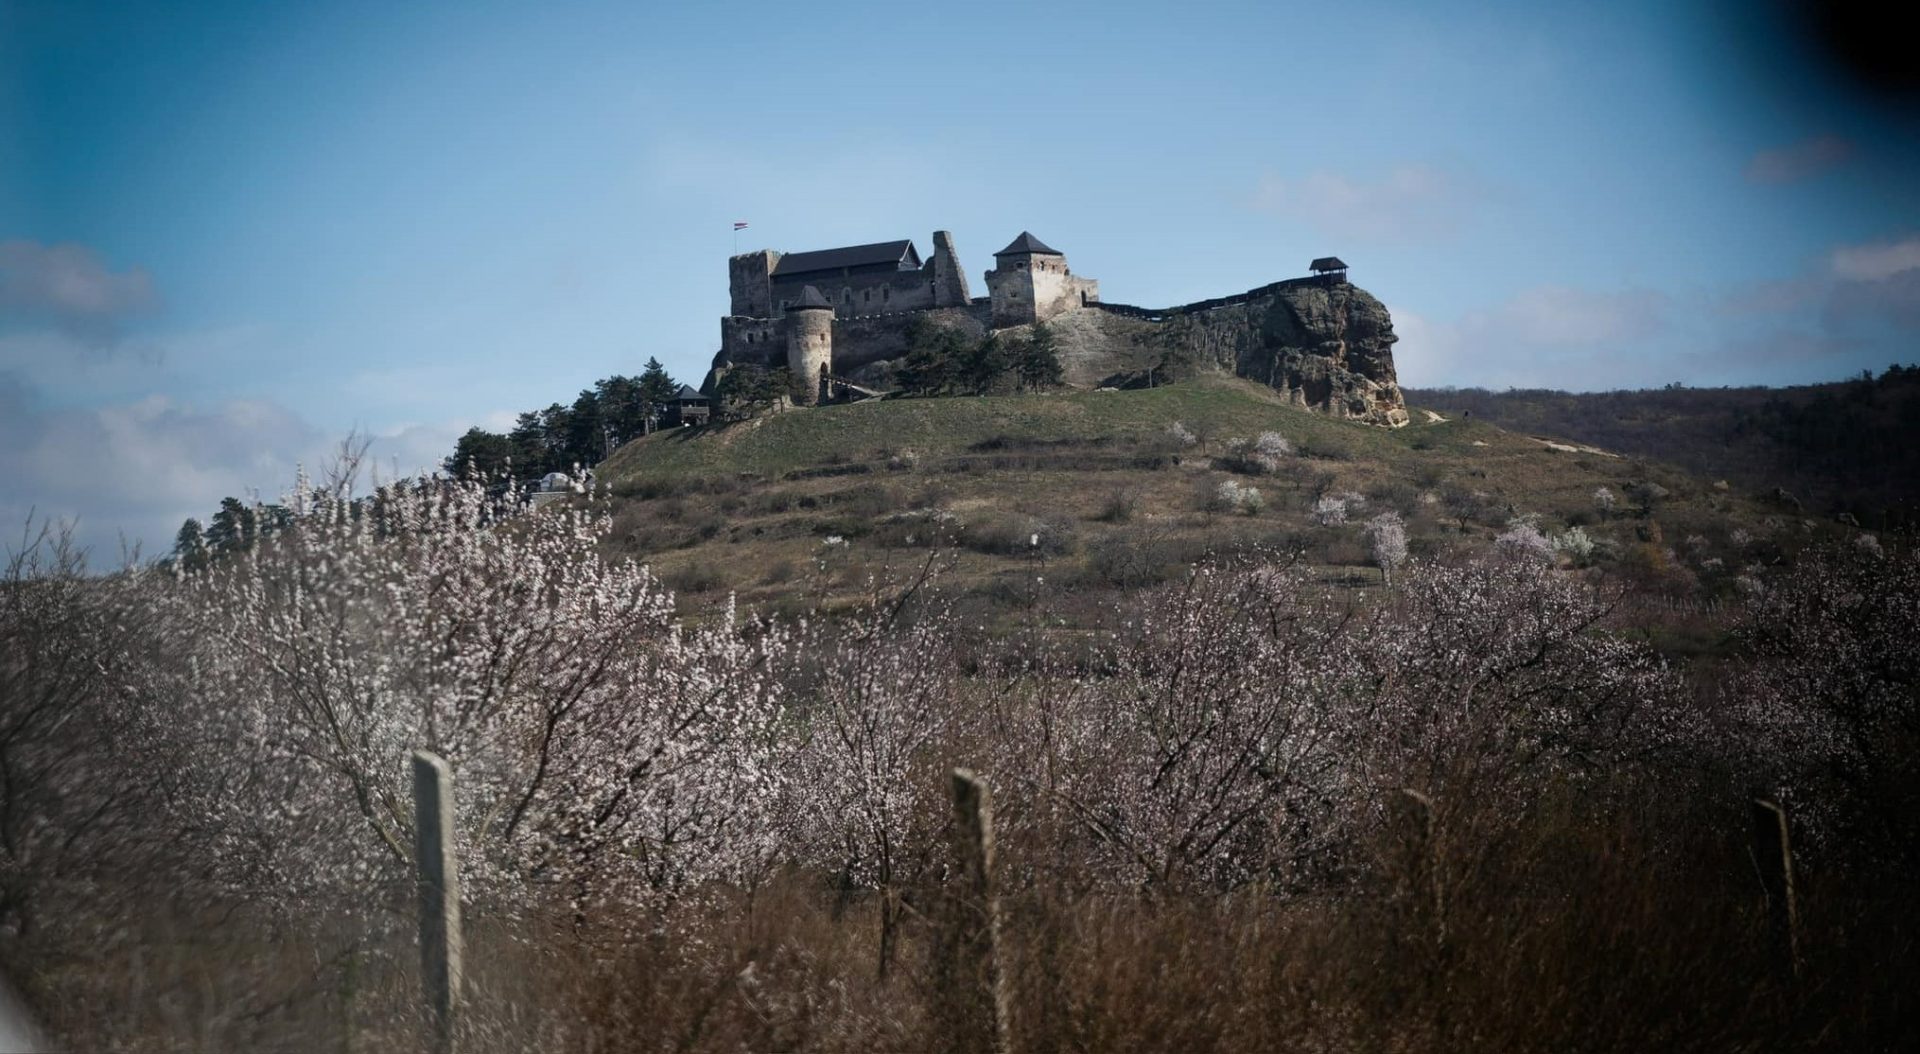 History come to life: Boldogkő Castle is waiting for you